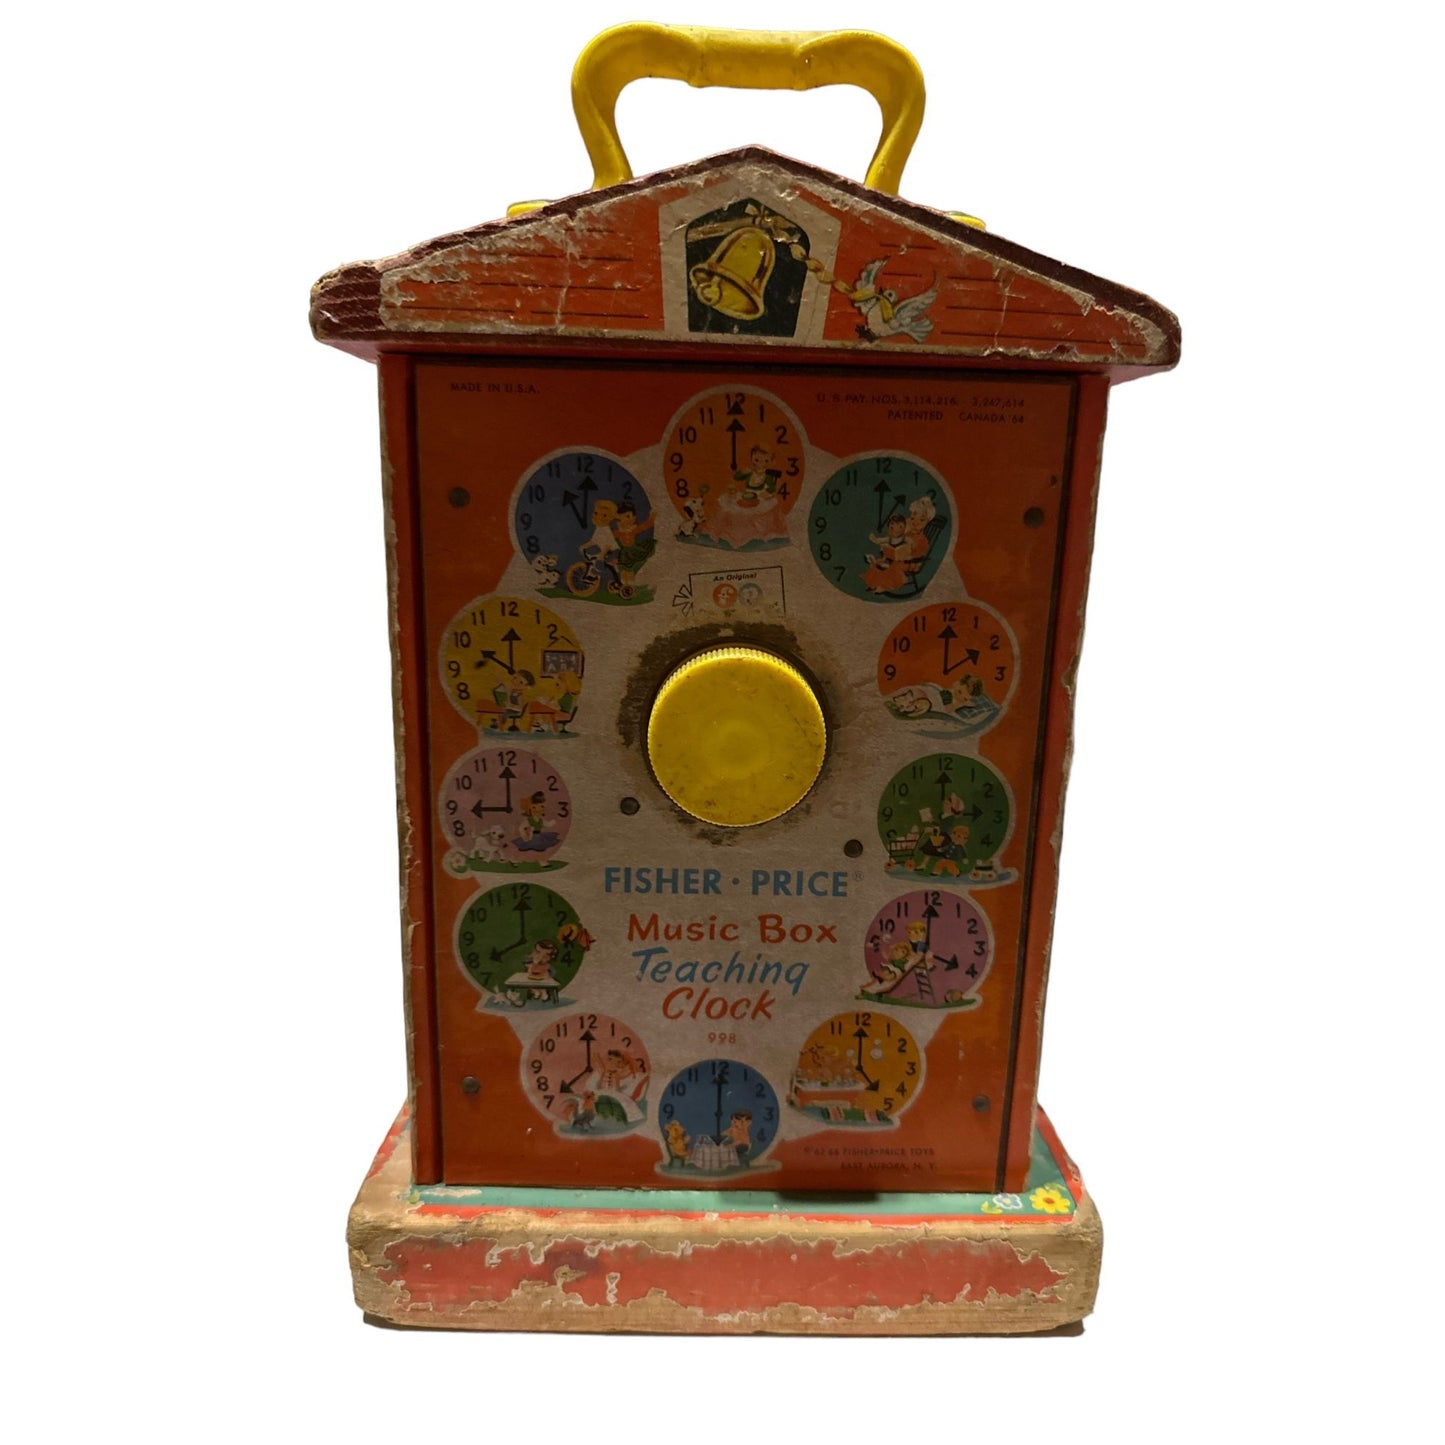 Vintage Fisher Price 1968 Teaching Clock Music Box Toy #998 Rare Collectible